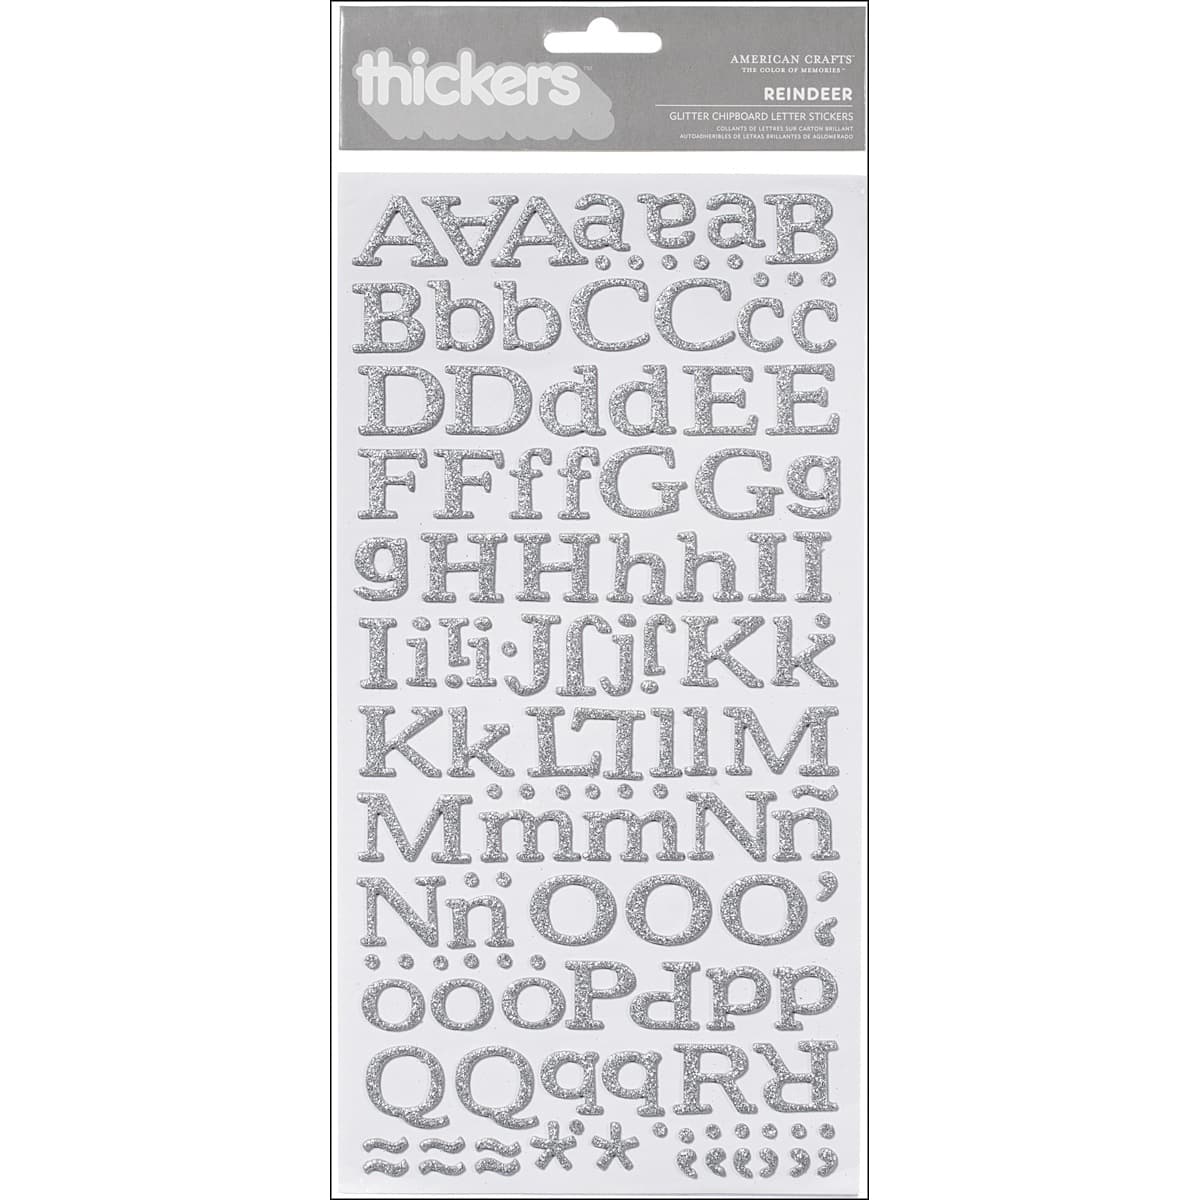 American Crafts Thickers Glitter Letter Sticker Sheets